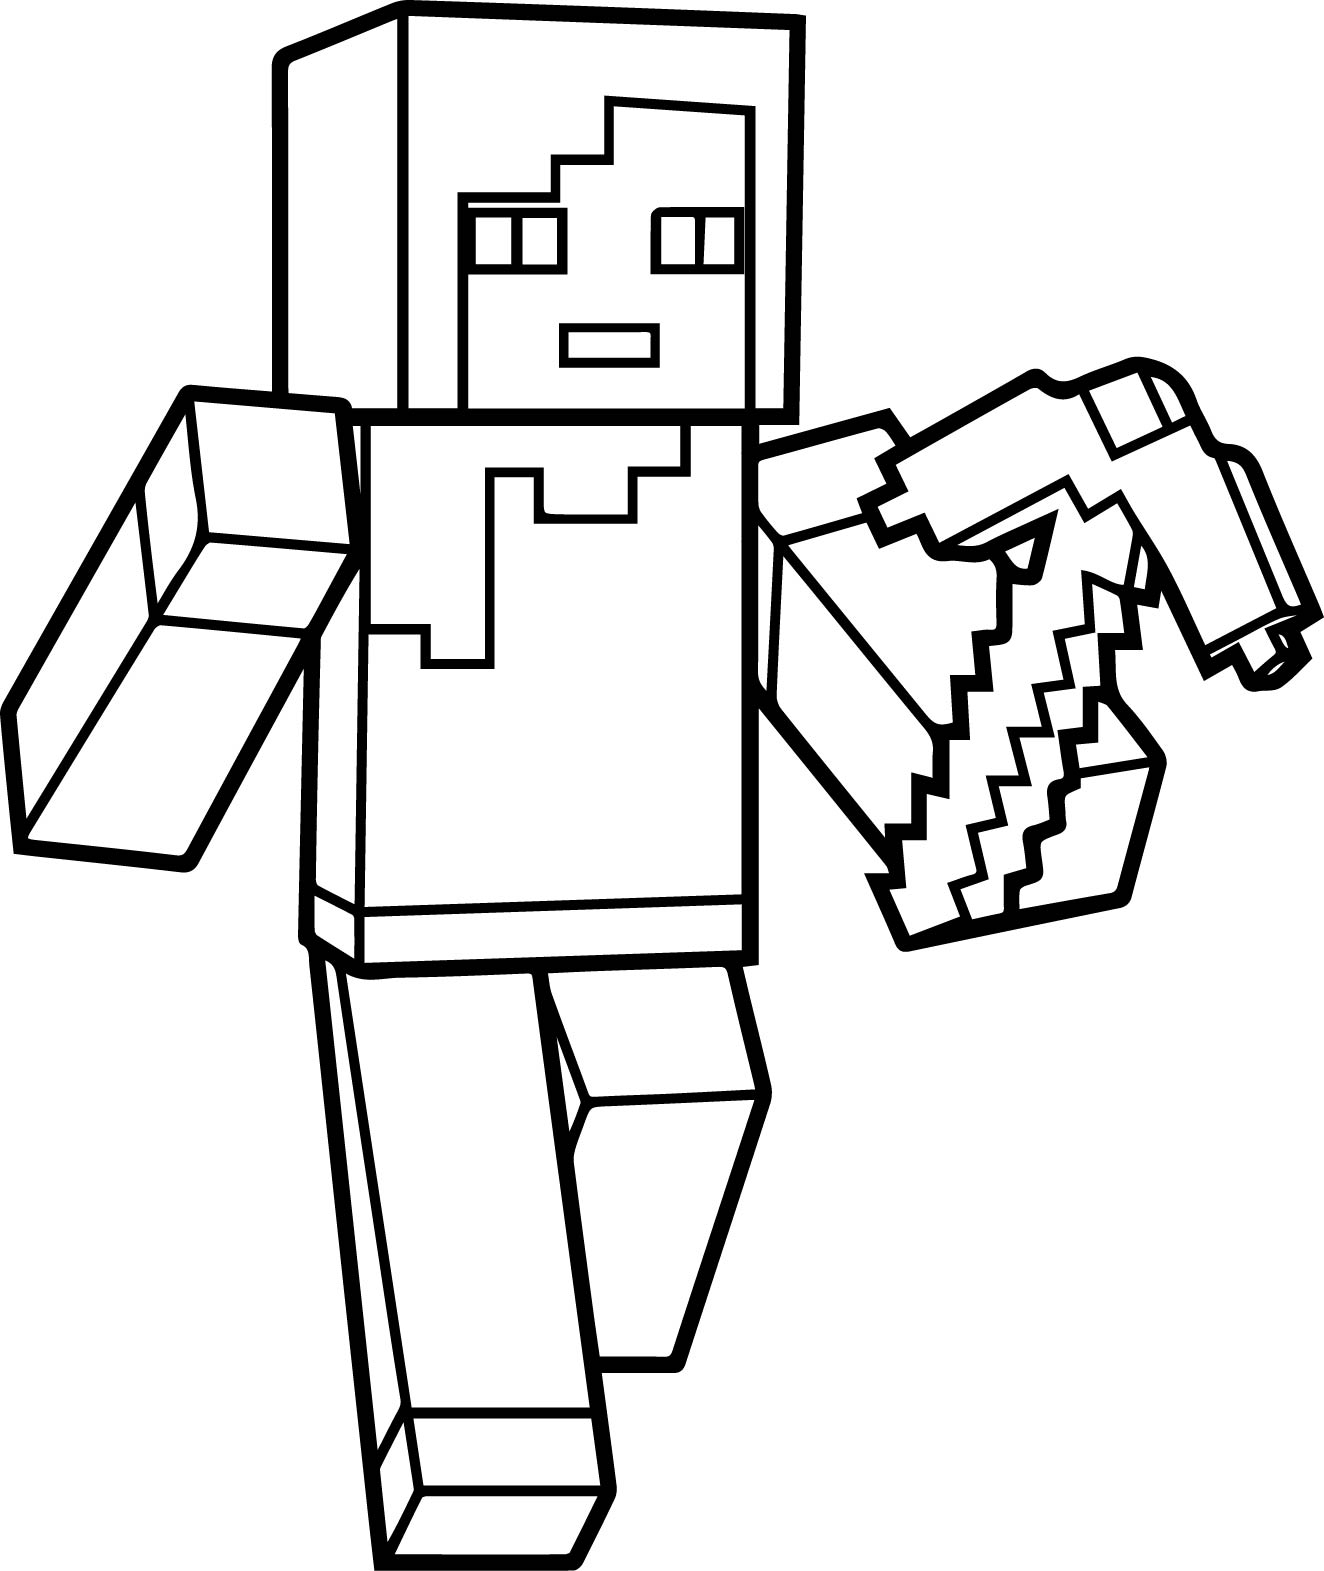 Minecraft Coloring Pages - Best Coloring Pages For Kids - 1324 x 1571 jpeg 124kB